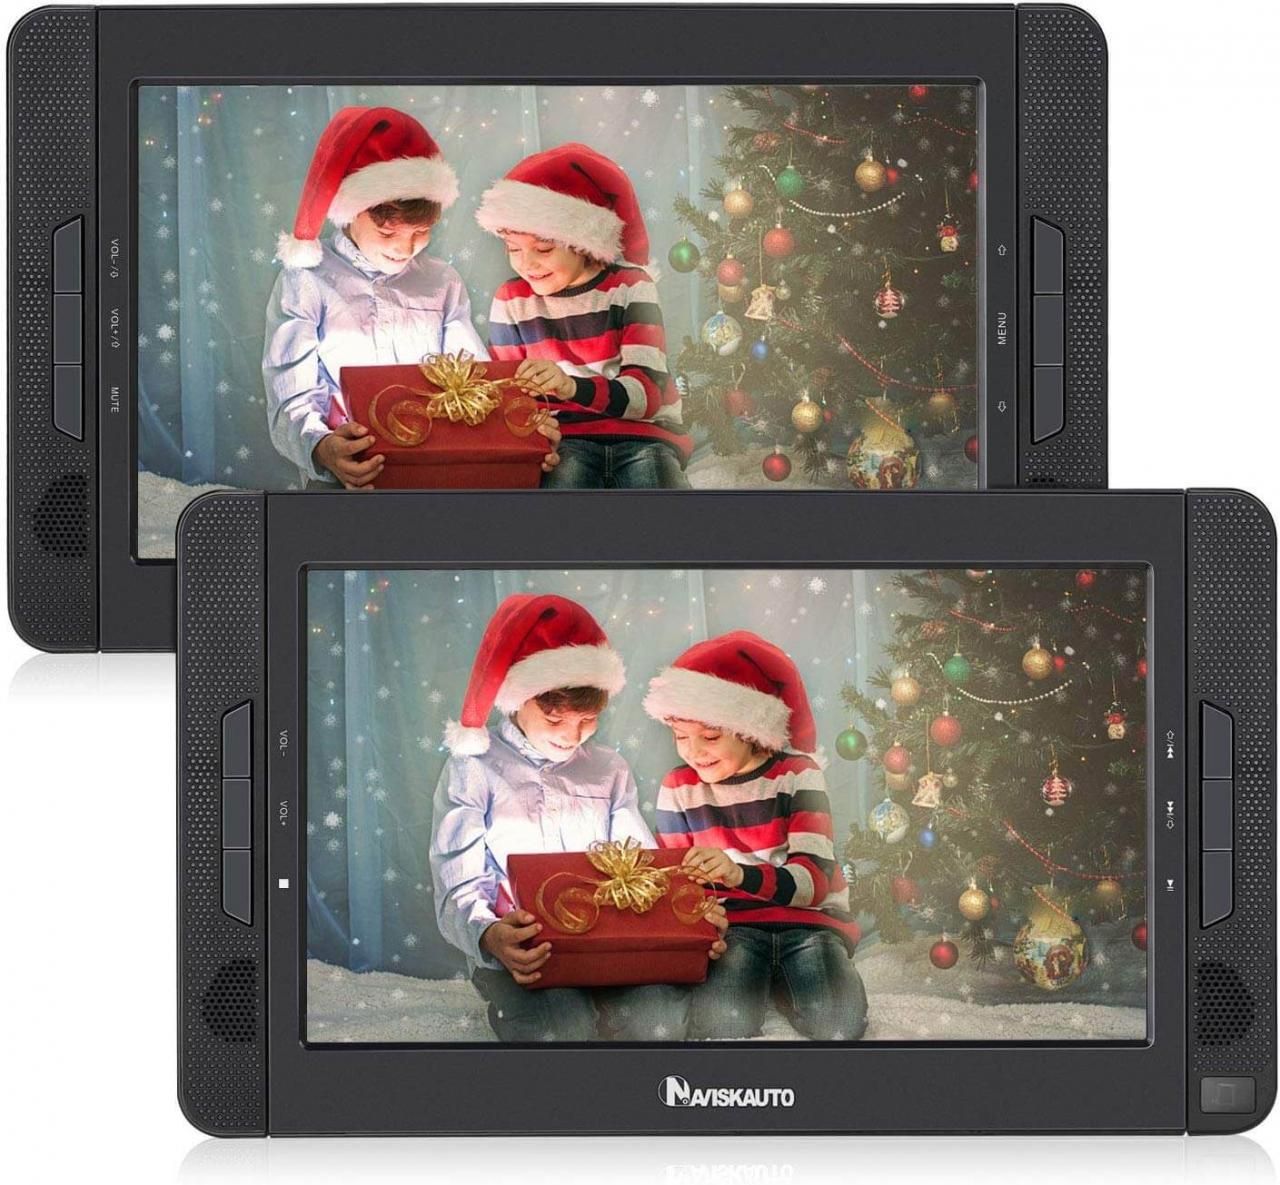 Best dual screen portable DVD players [2021 Guide]